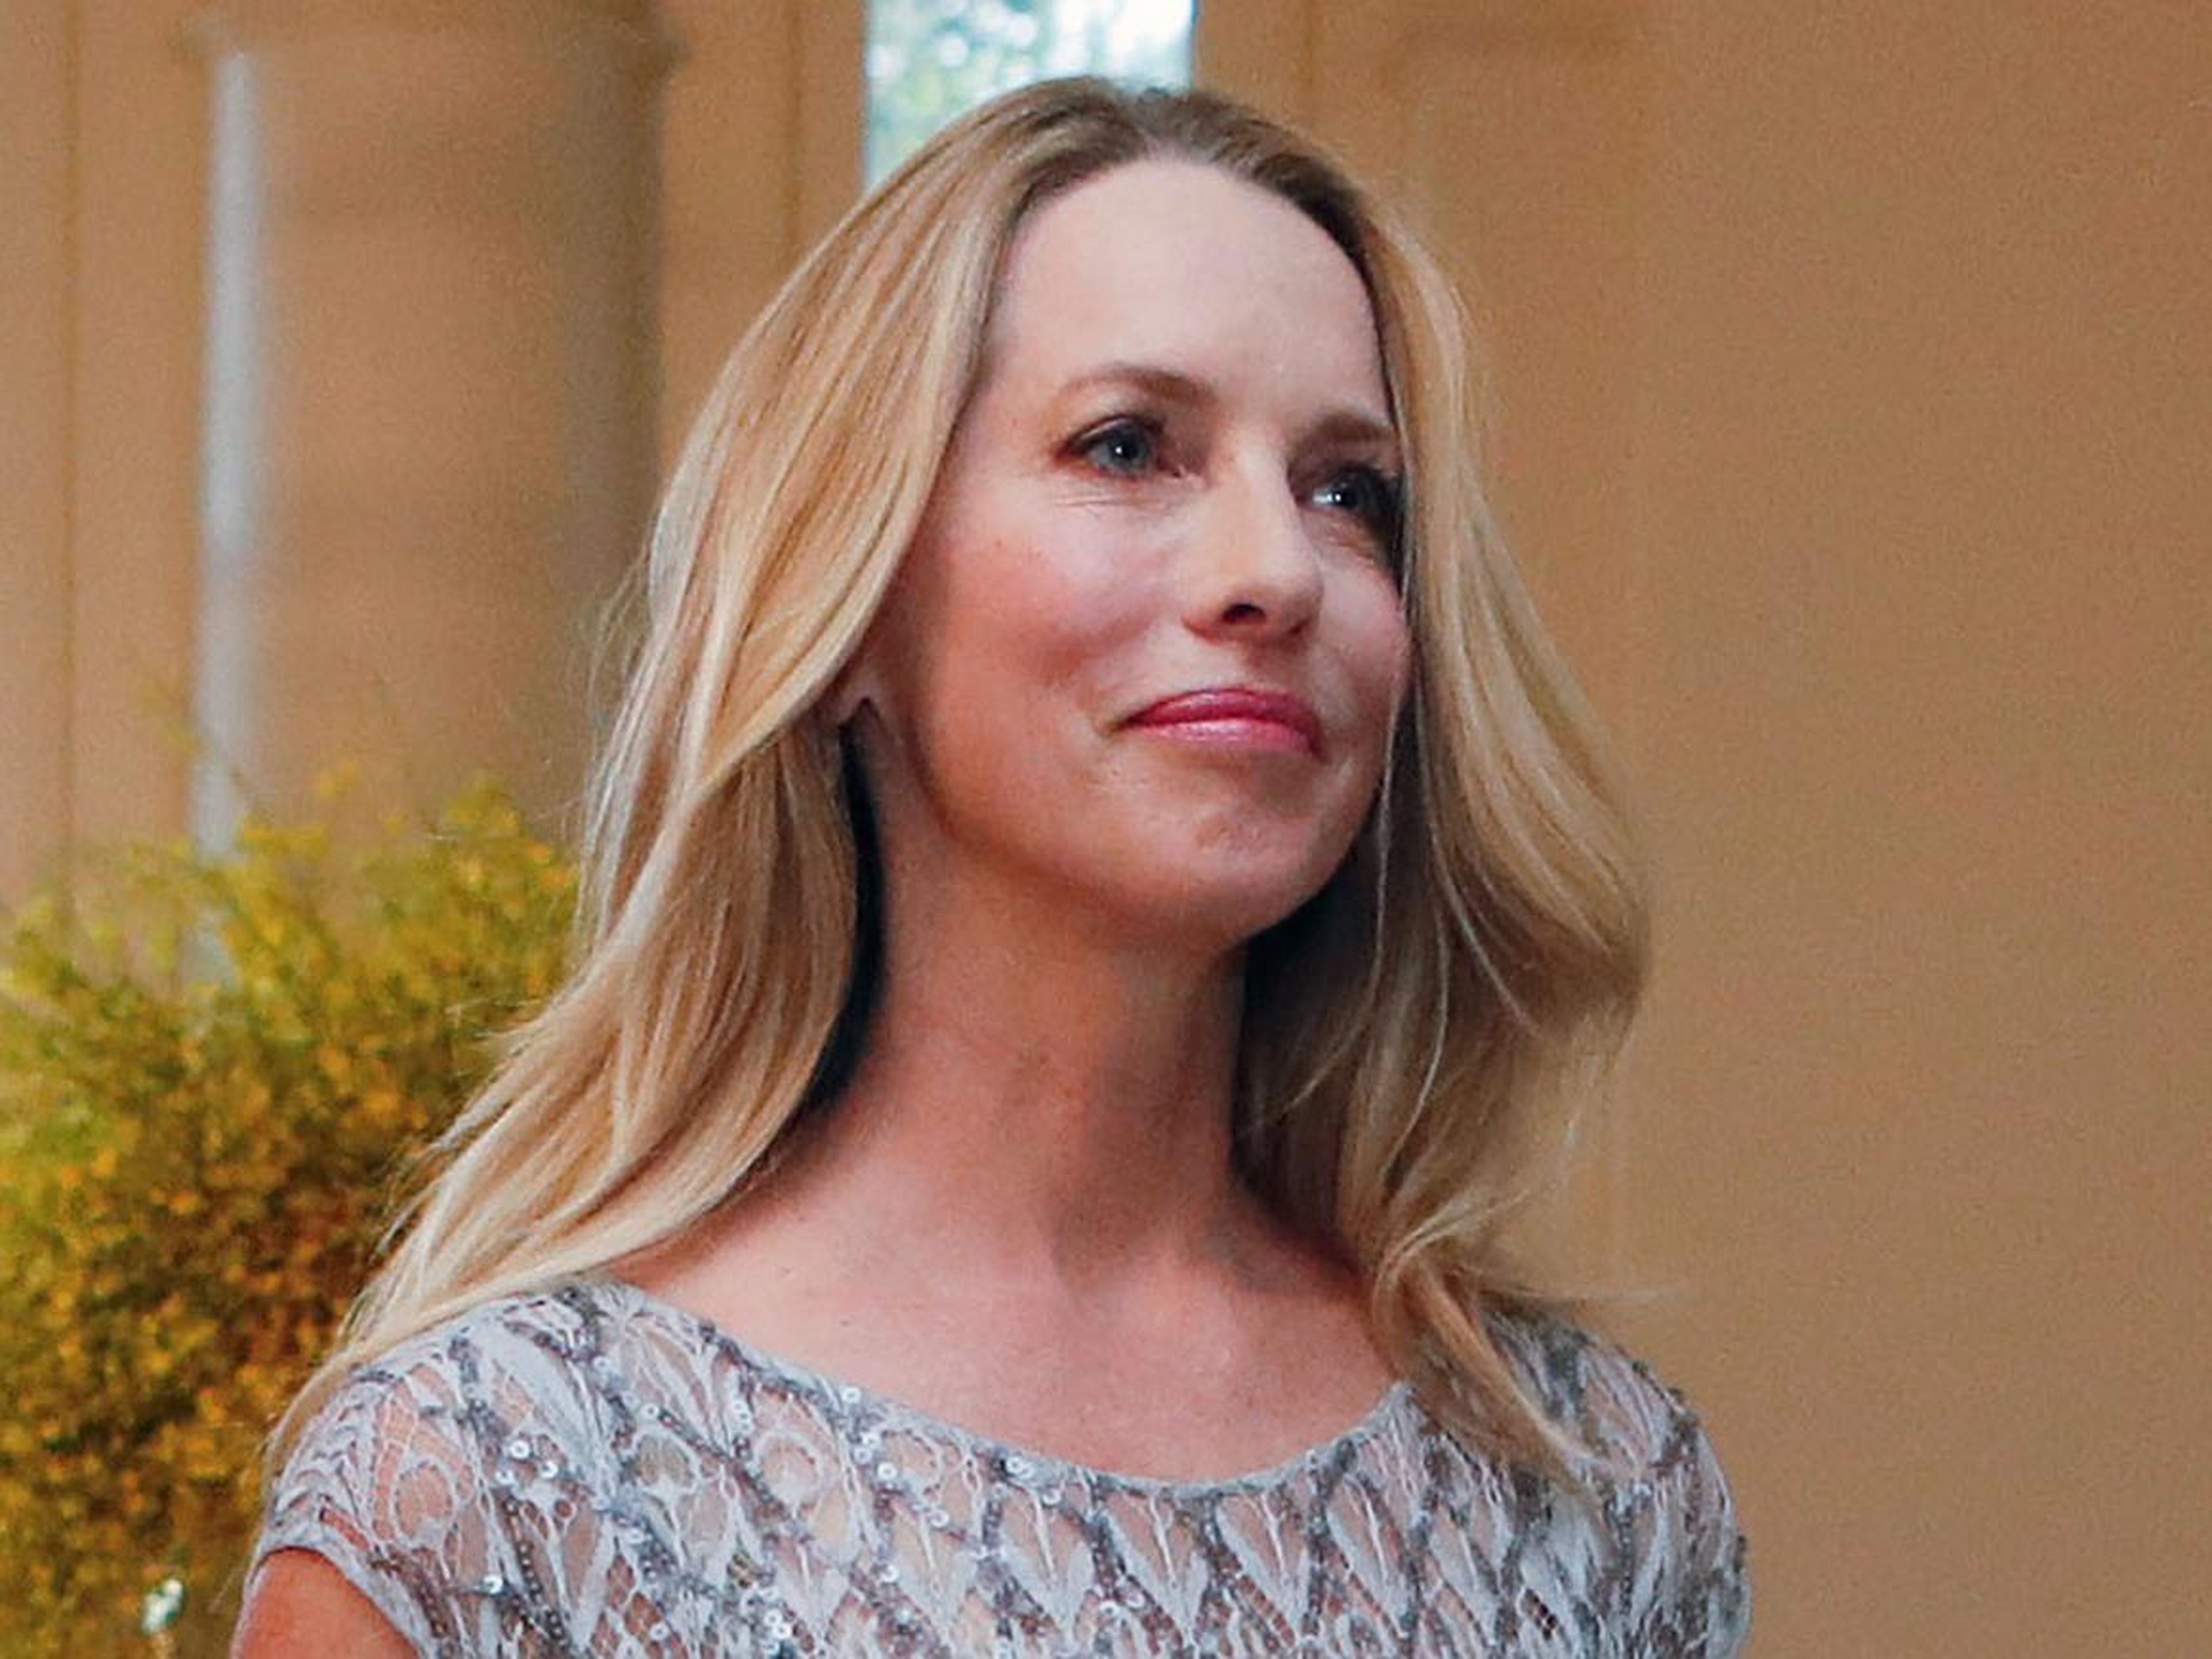 17. Laurene Powell Jobs, widow of Steve Jobs. Net worth: £13.9 billion ($18.9 billion). She founded social impact enterprise Emerson Collective and was recently rumoured to be in talks to back BuzzFeed’s news division.